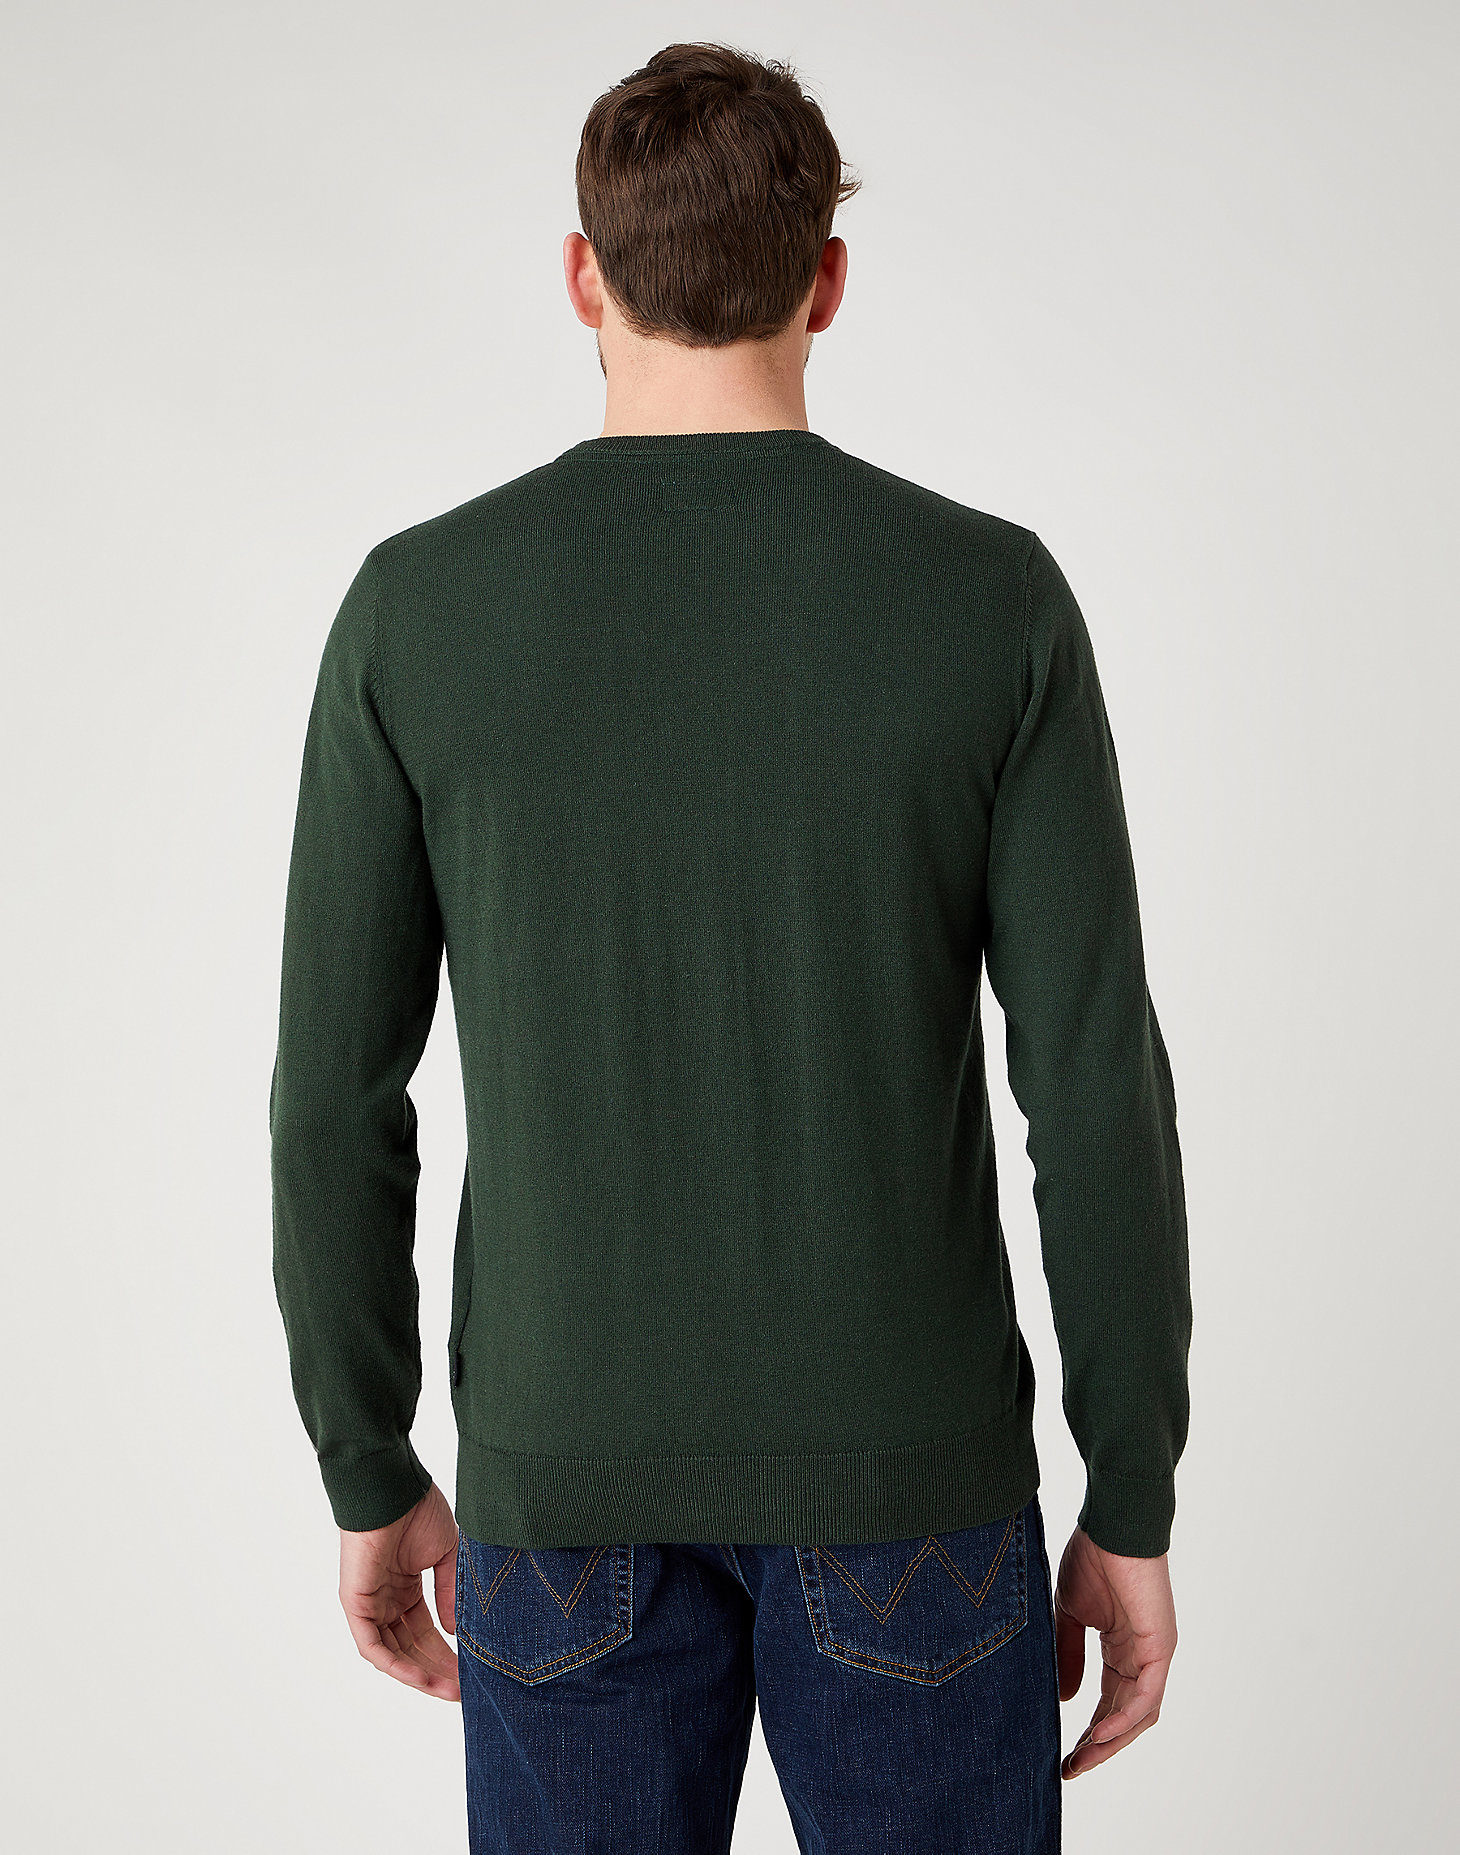 Crewneck Knit in Deep Forest alternative view 2